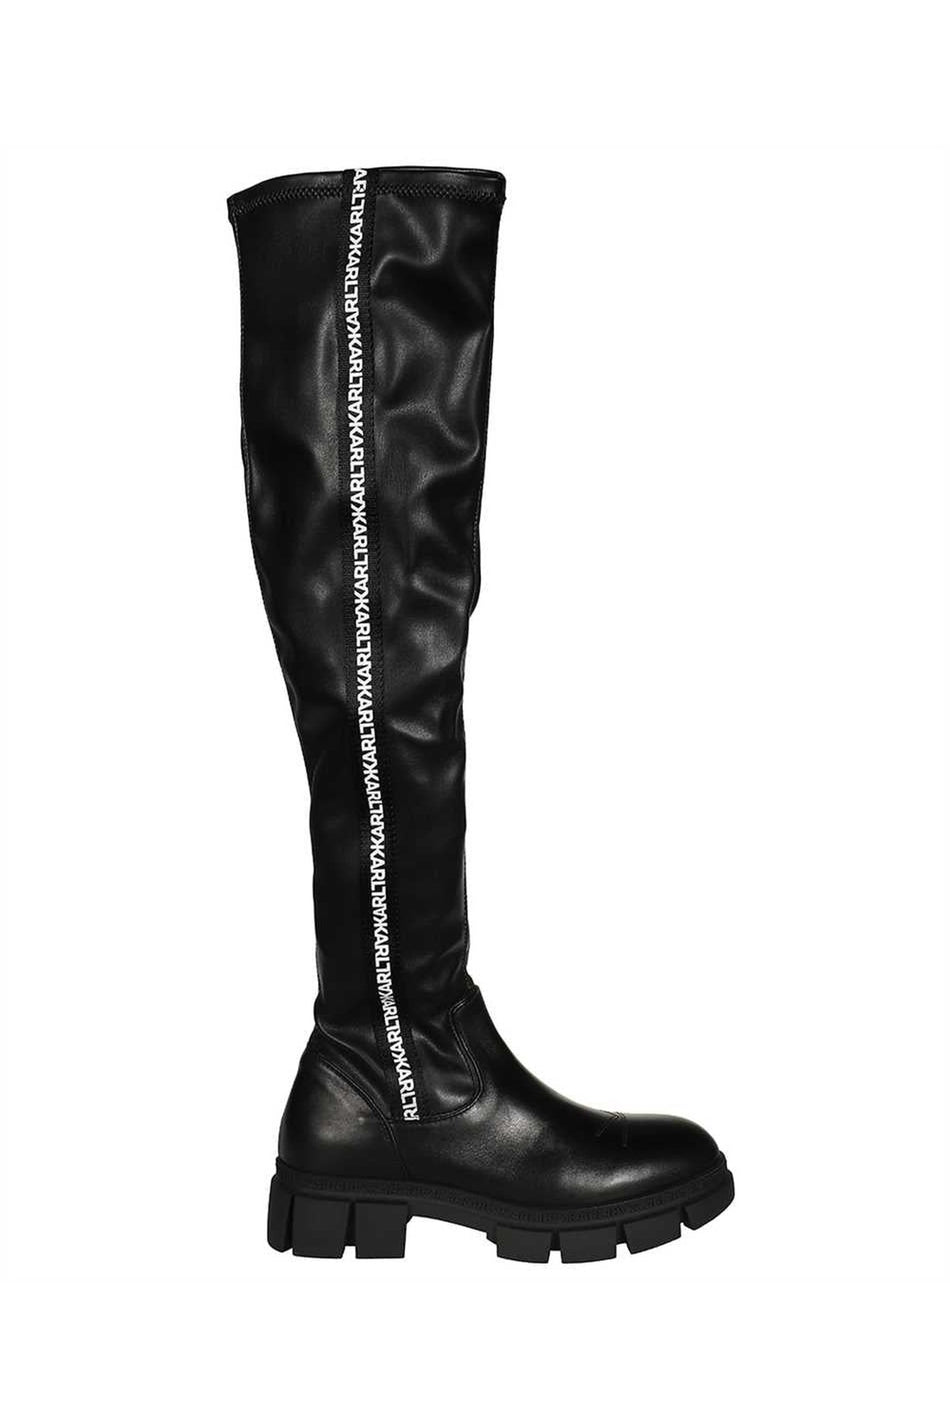 Over-the-knee boots-Karl Lagerfeld-OUTLET-SALE-37-ARCHIVIST